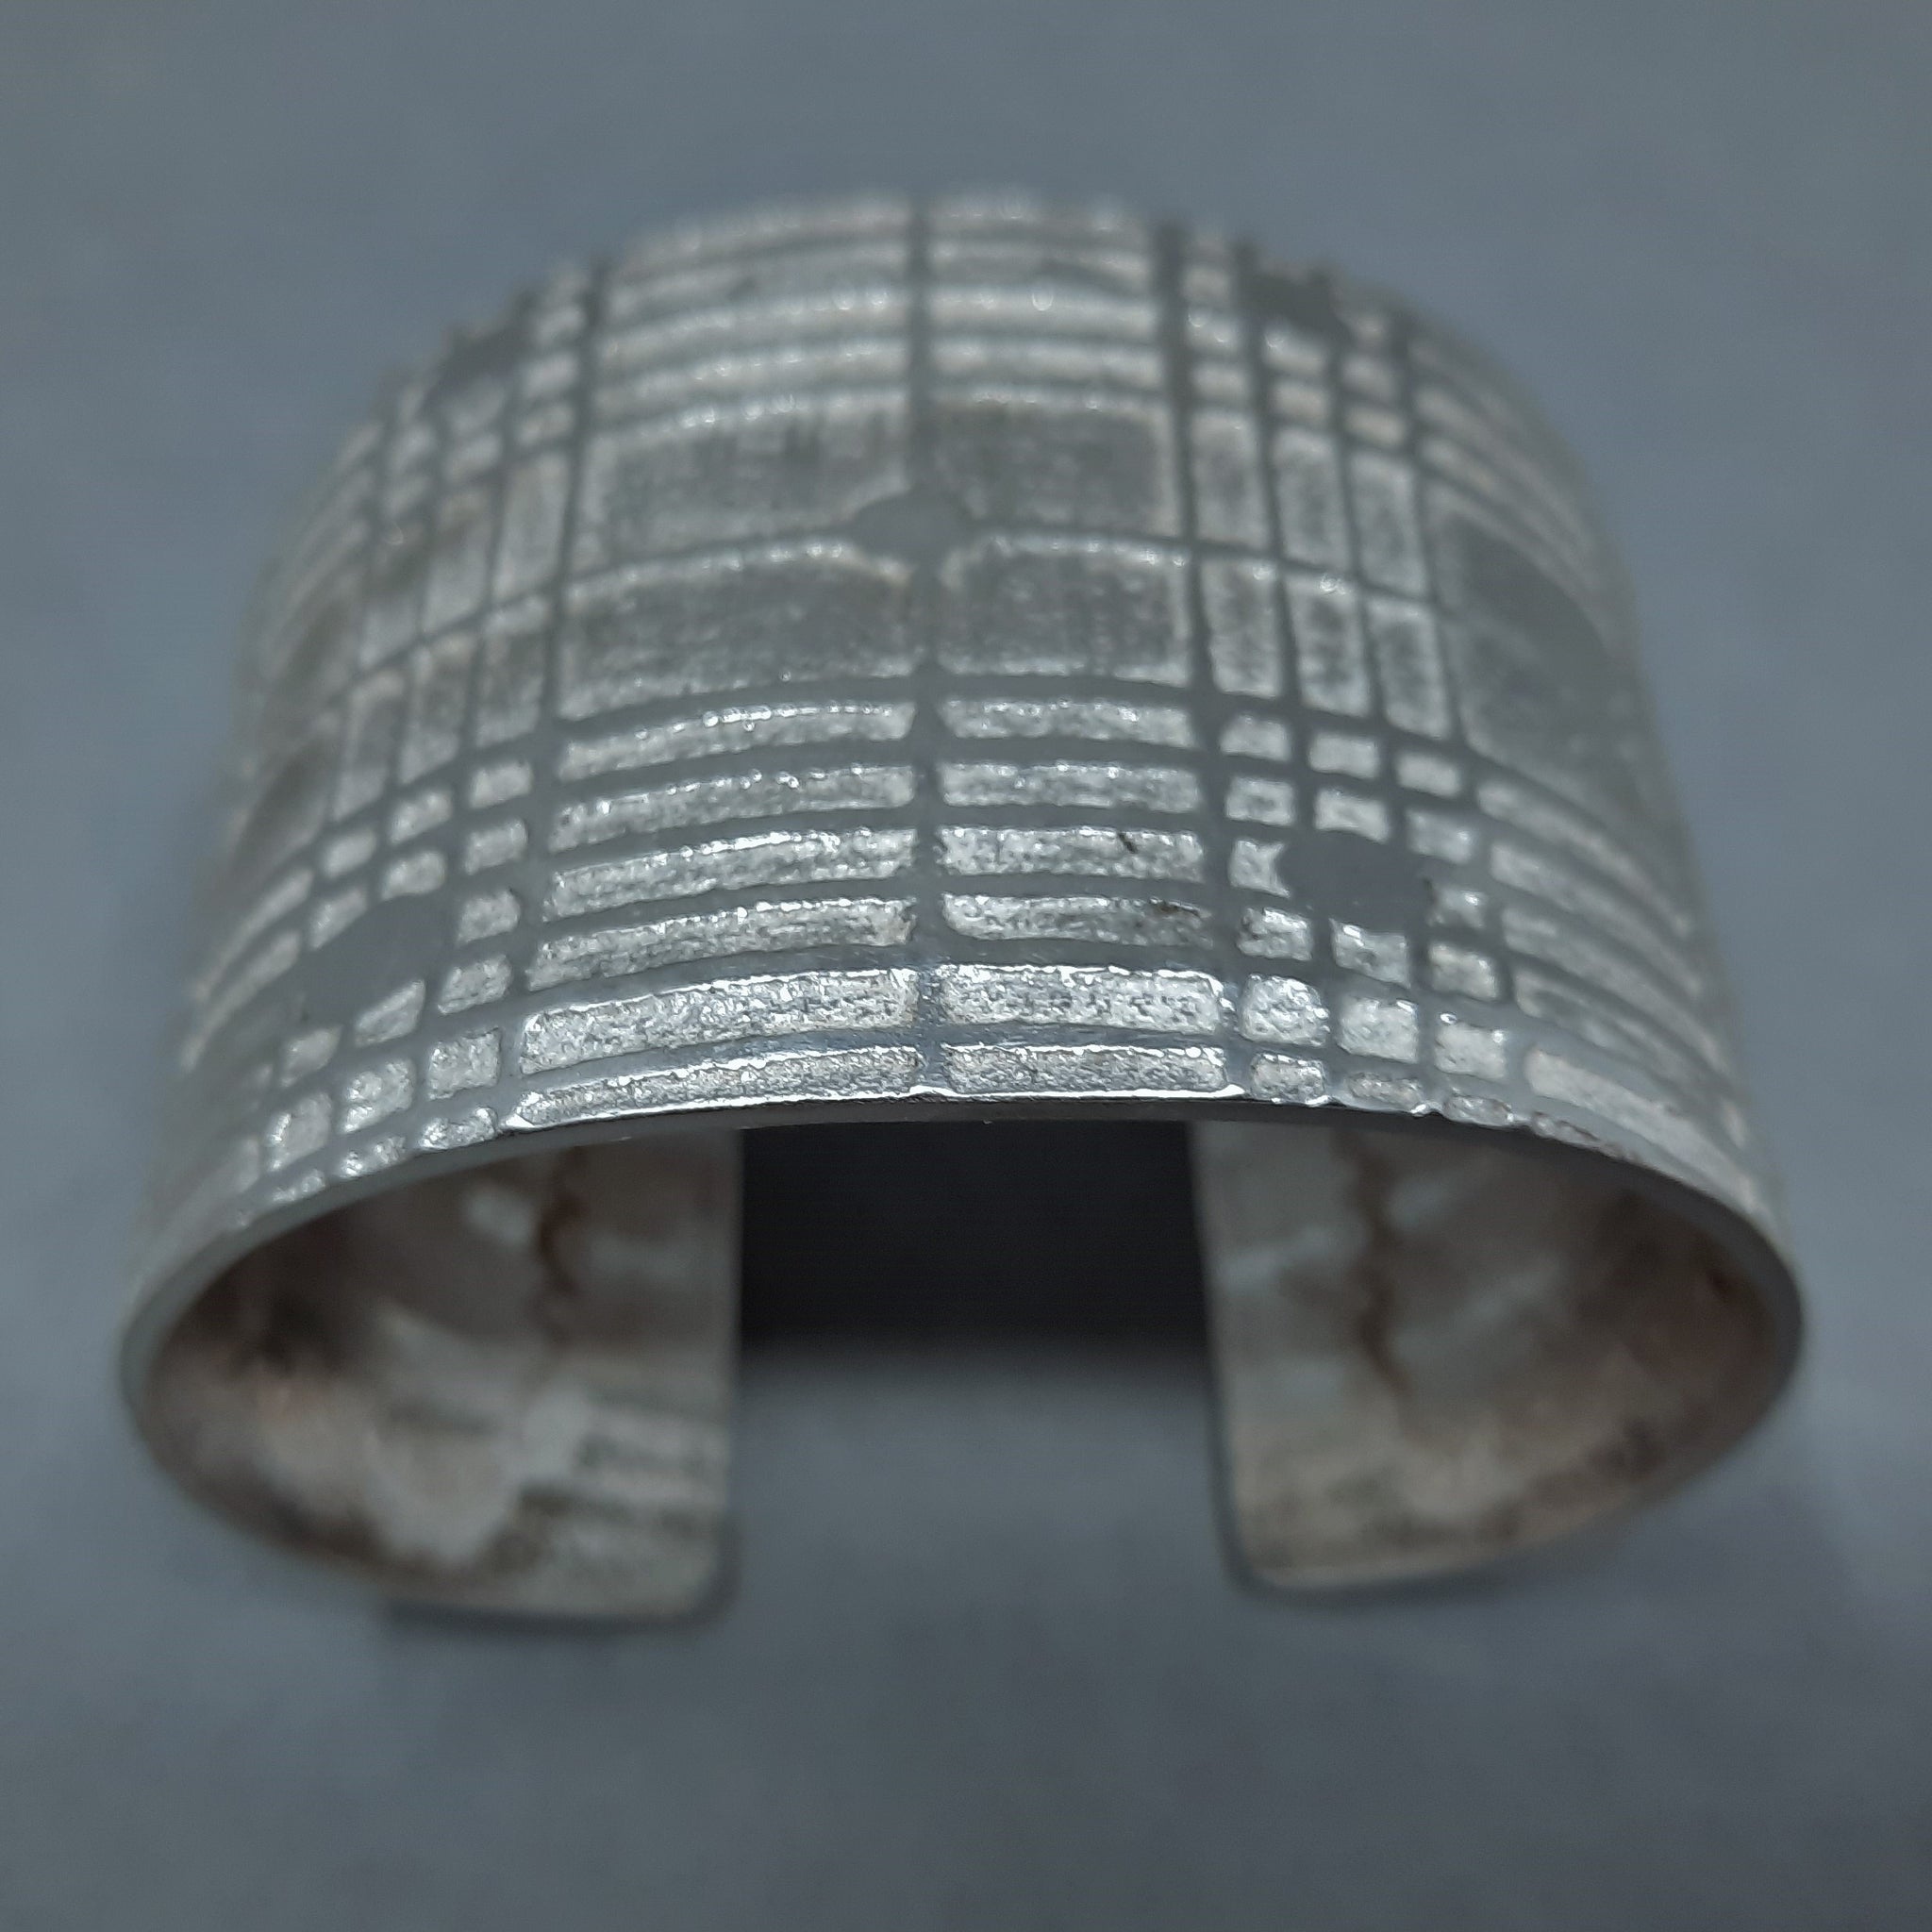 Large Navajo Silver Cuff Bracelet with Plaid Design by Gino Antonio 1.7/8" wide